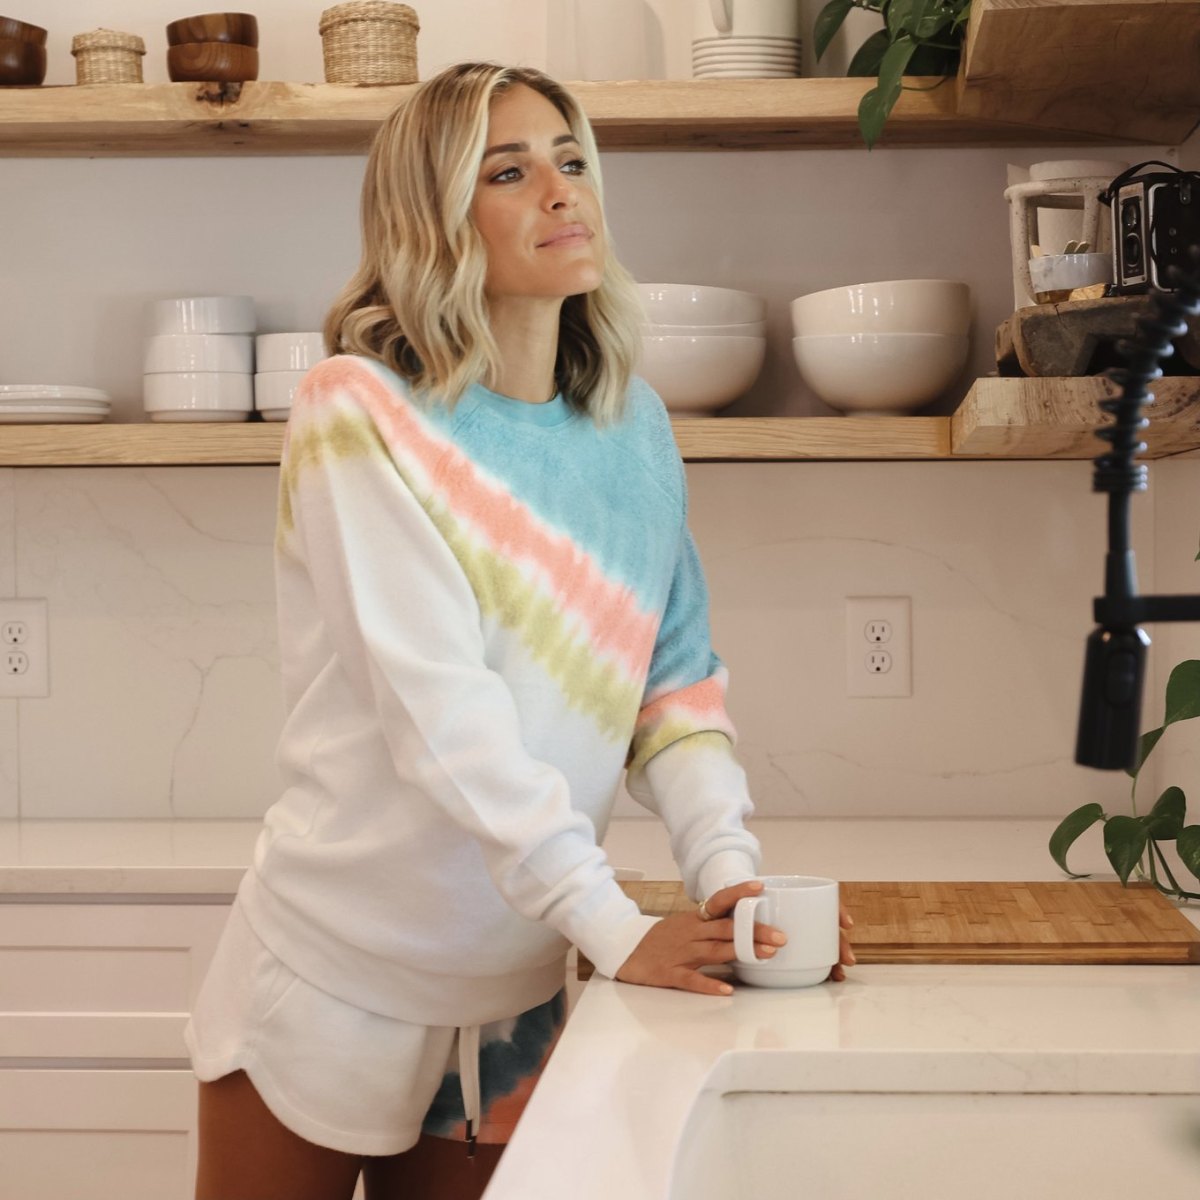 Kristin Cavallari Just Launched an Athleisure Collection With Feat ...